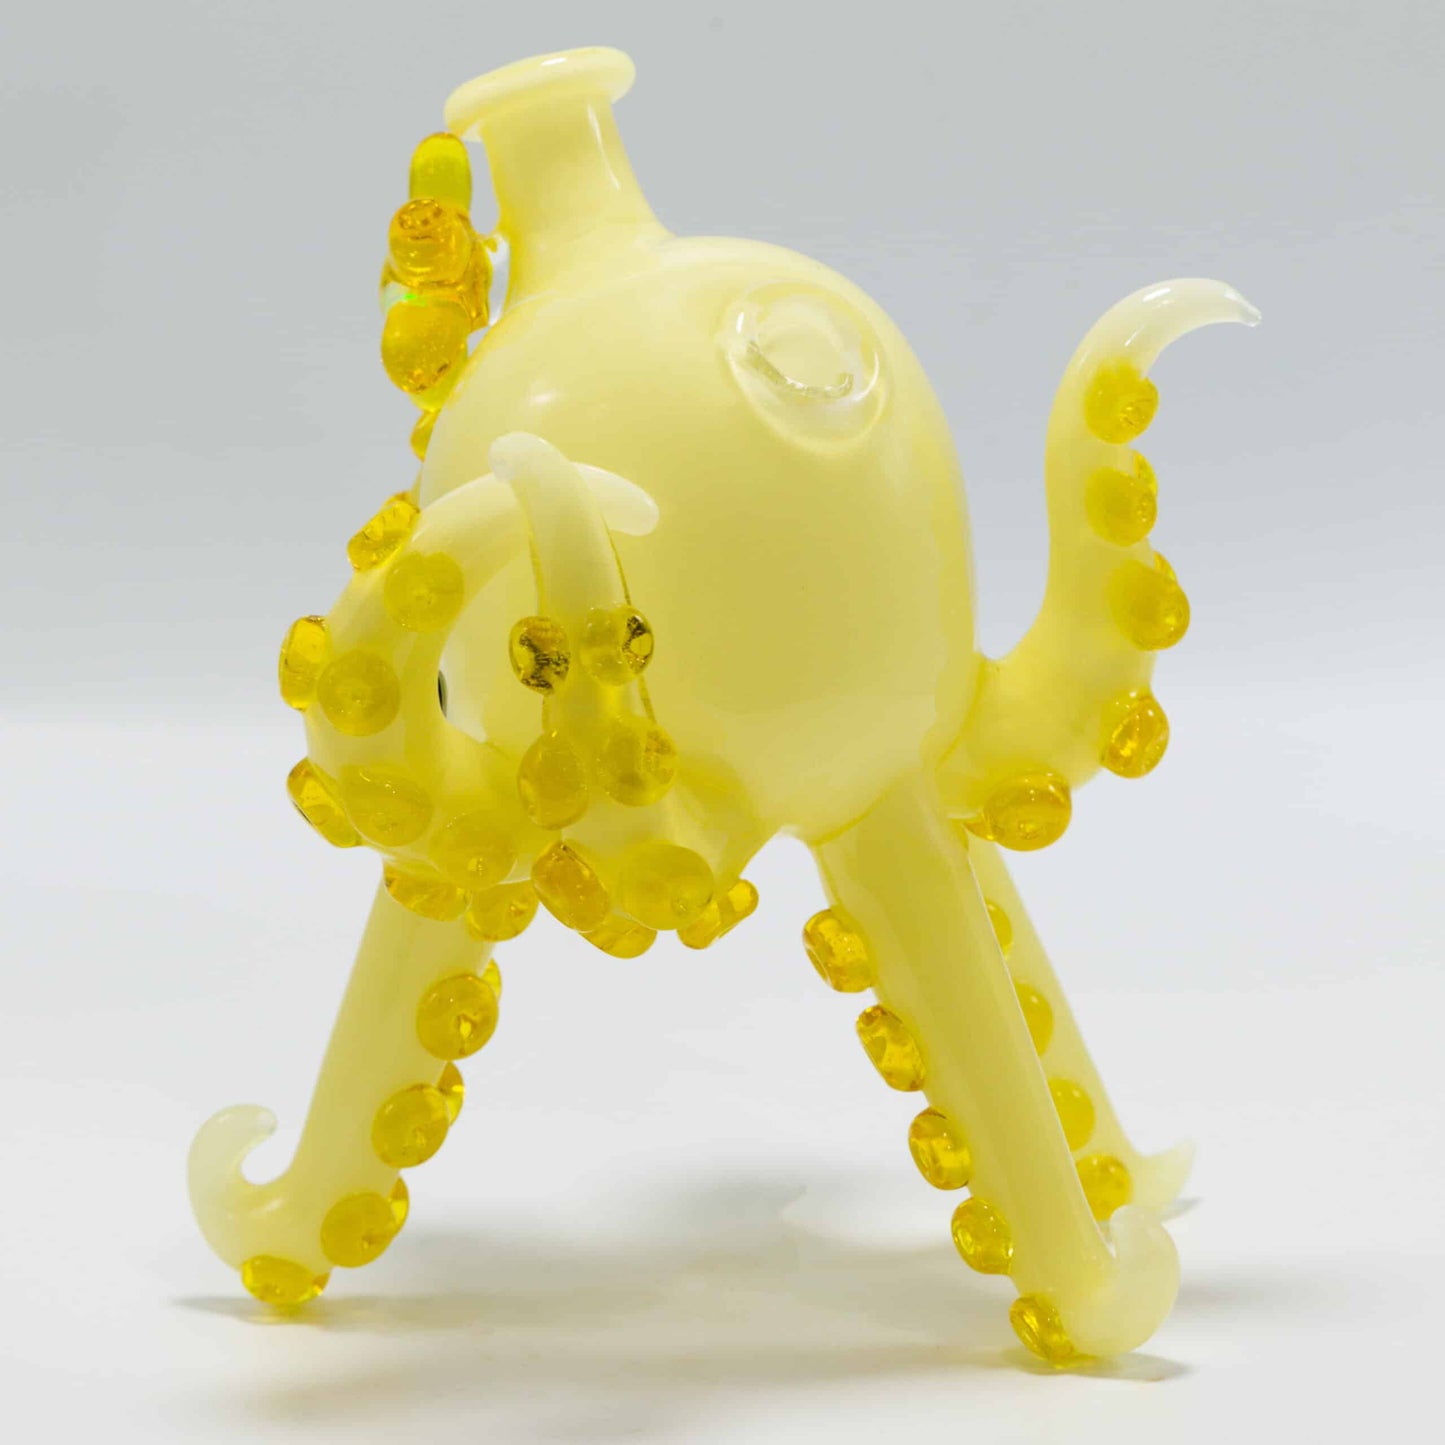 artisan-crafted design of the Full Color Octopus Rig by Flame Princess Glass